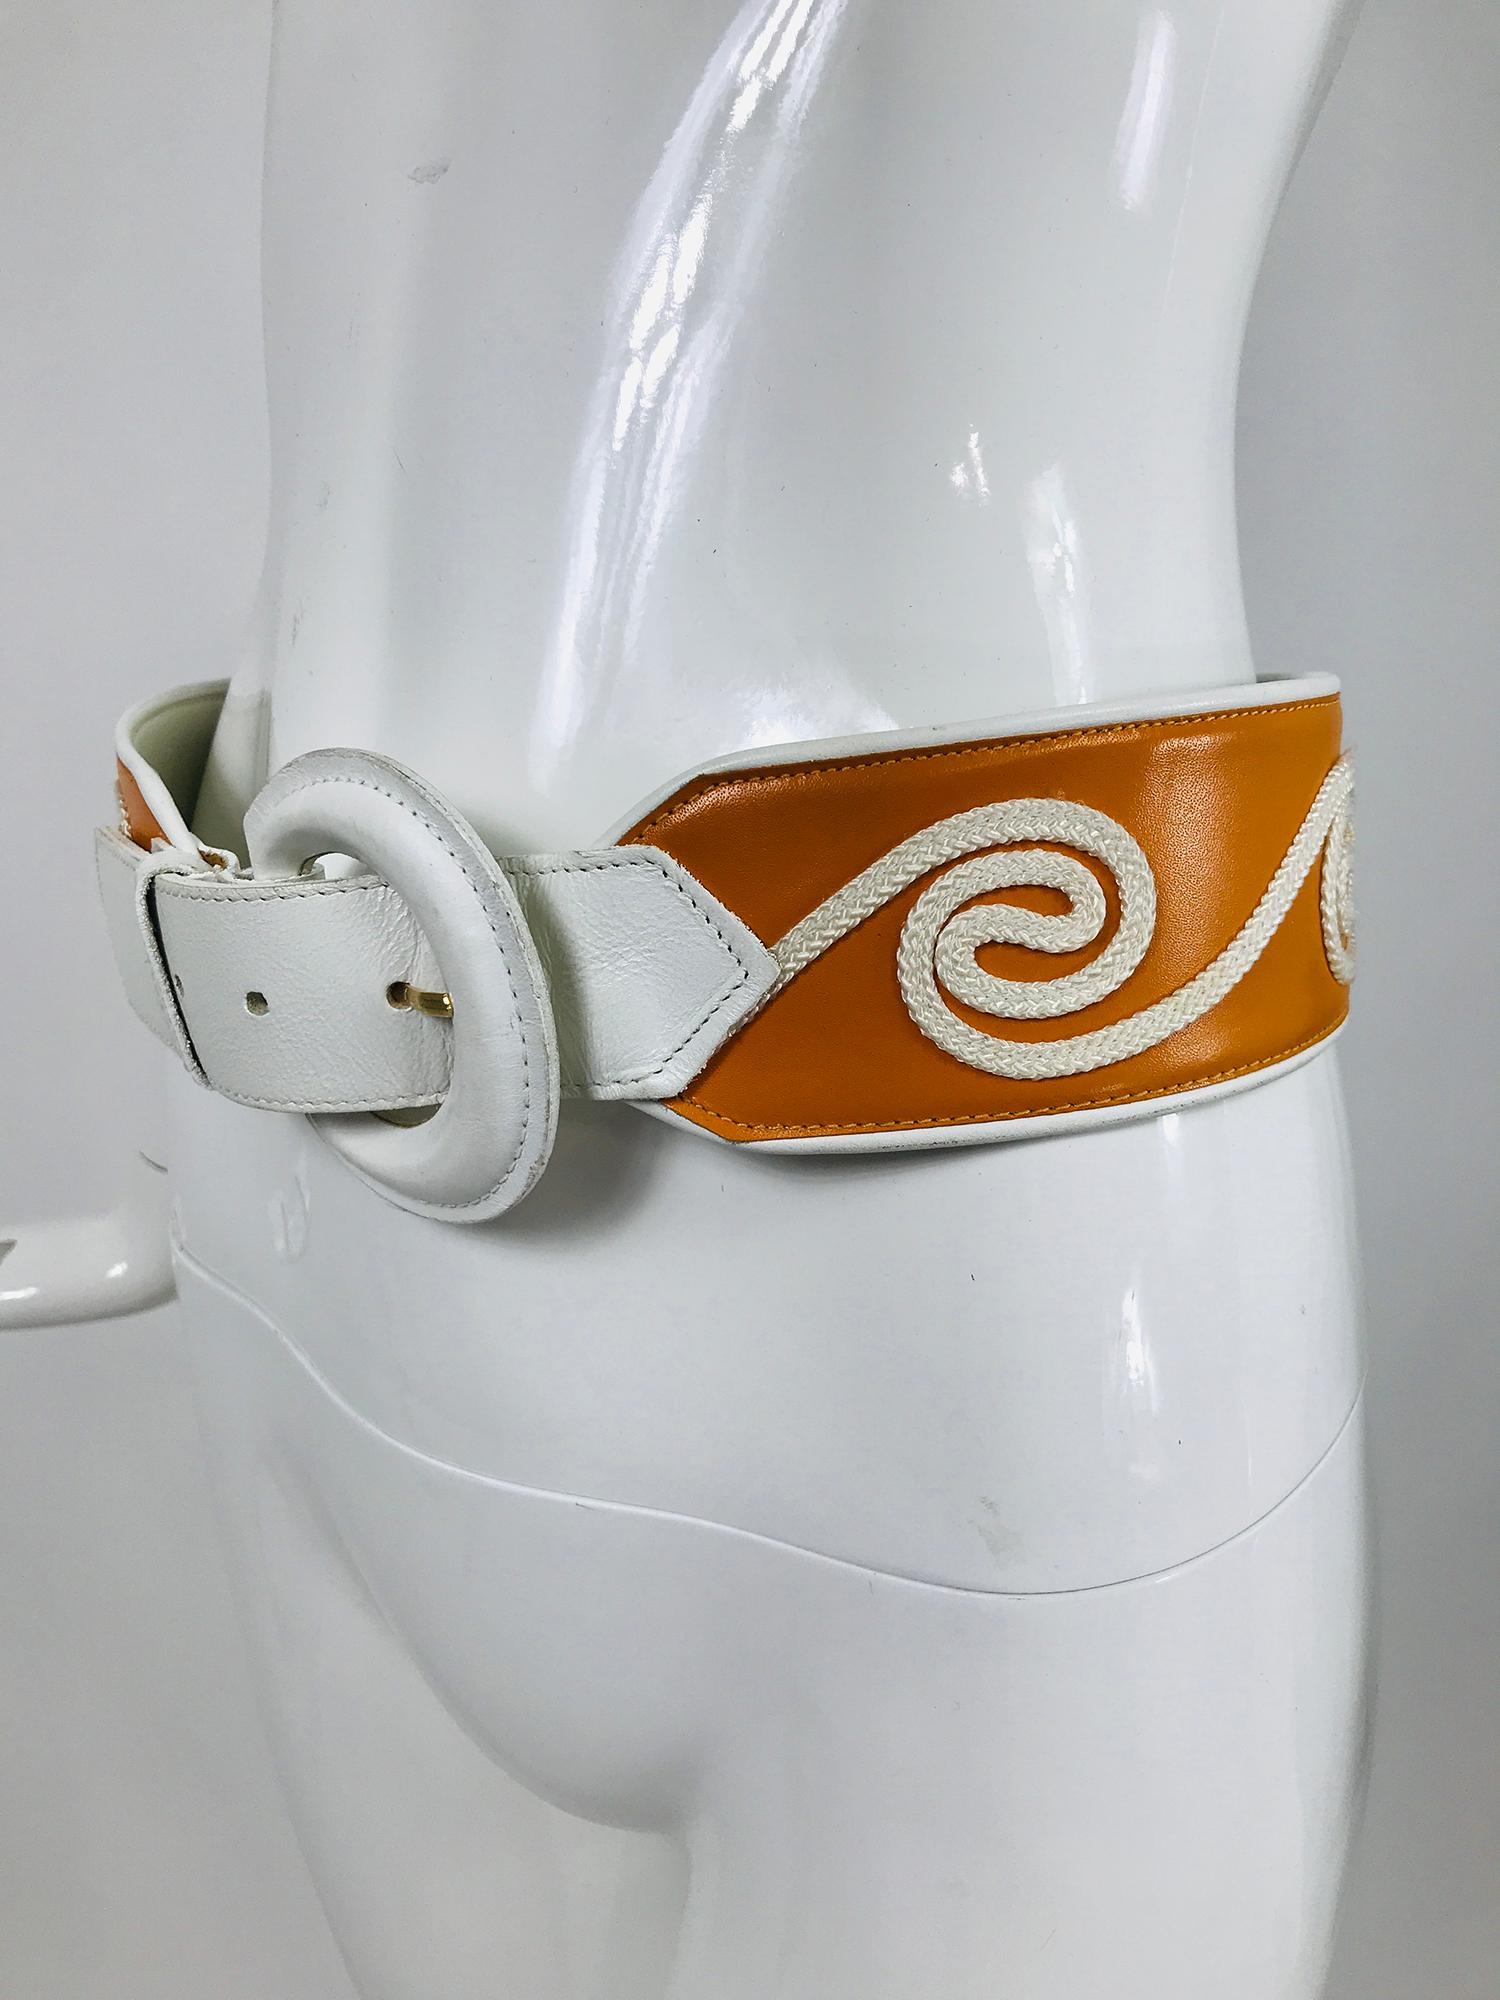  Christian Dior White & Golden Yellow Cord Applique Wide Leather Belt M-L 1990s For Sale 4